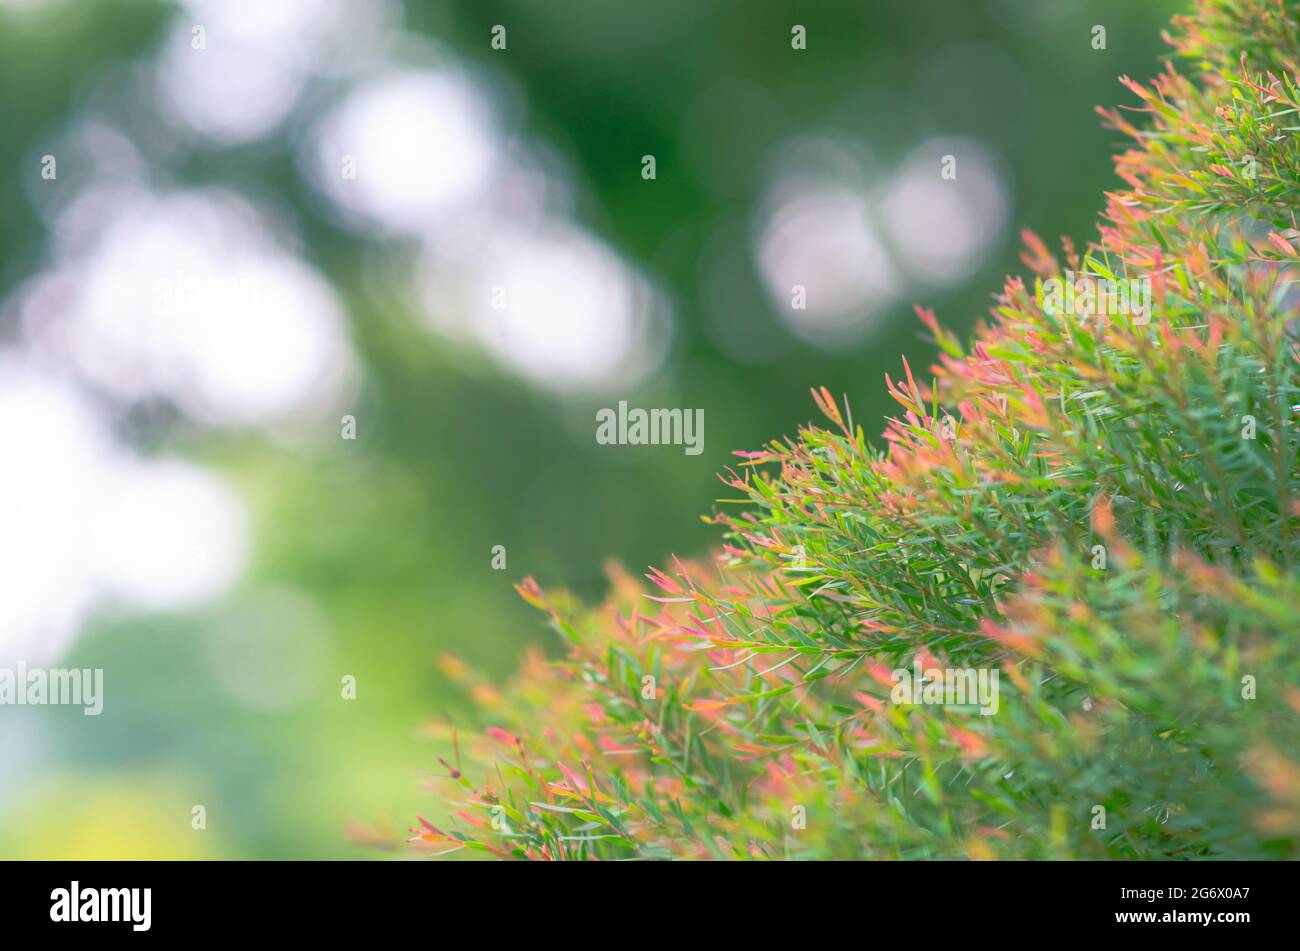 Focus and blurred photo of green and red color Honey Myrtle (Melaleuca linariifolia ‘Claret Tops’) leaves with the background of bokeh light. Stock Photo